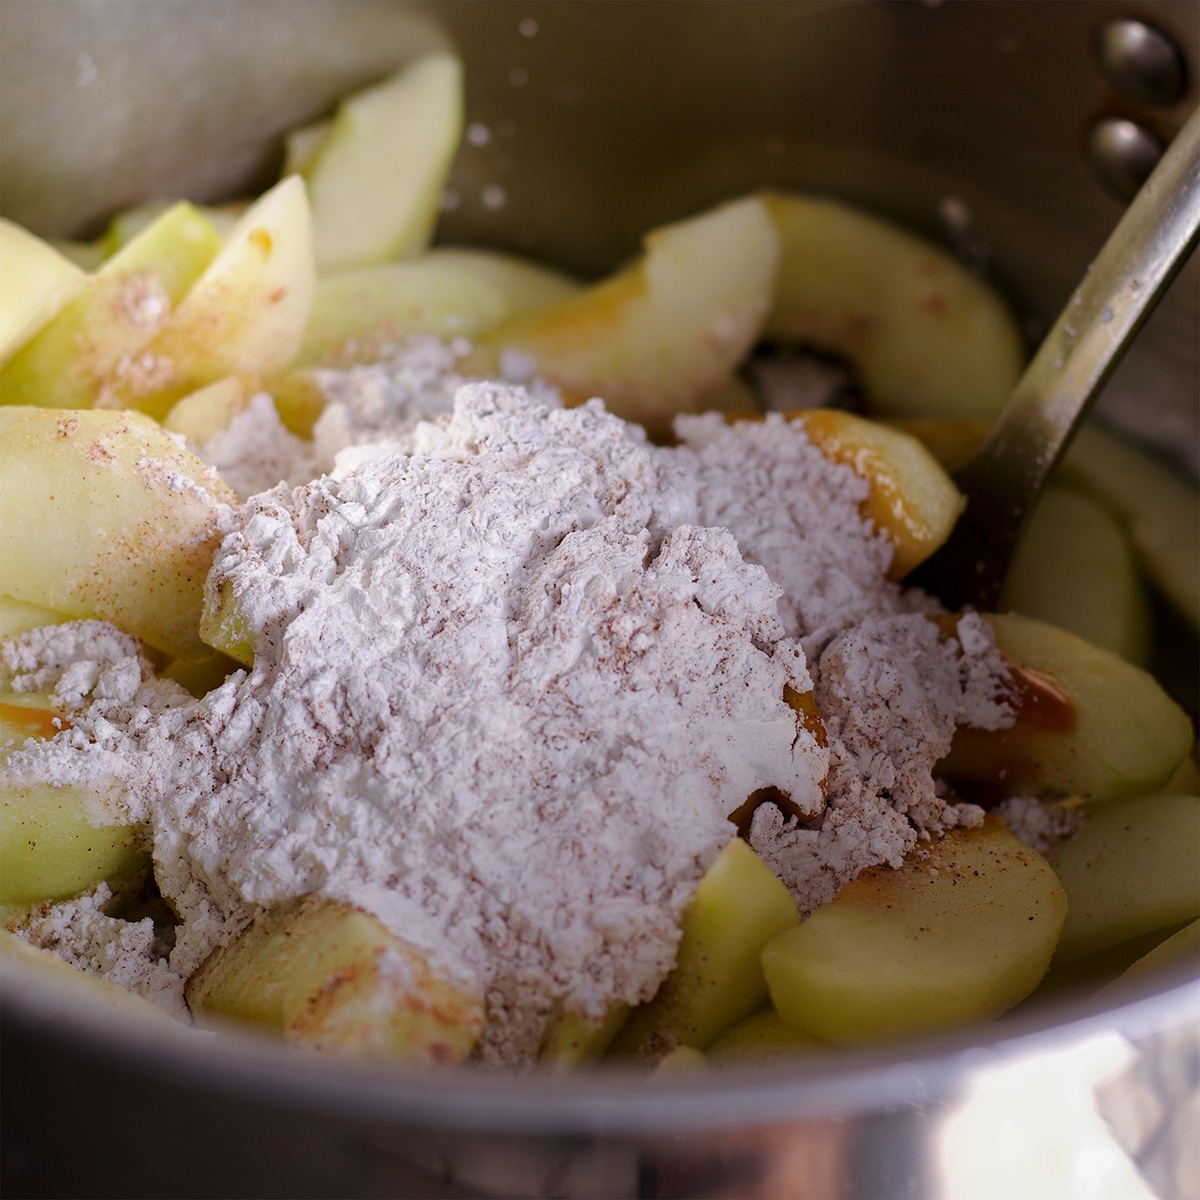 Someone using a spoon to stir flour into a saucepan of sliced apples and sugar.